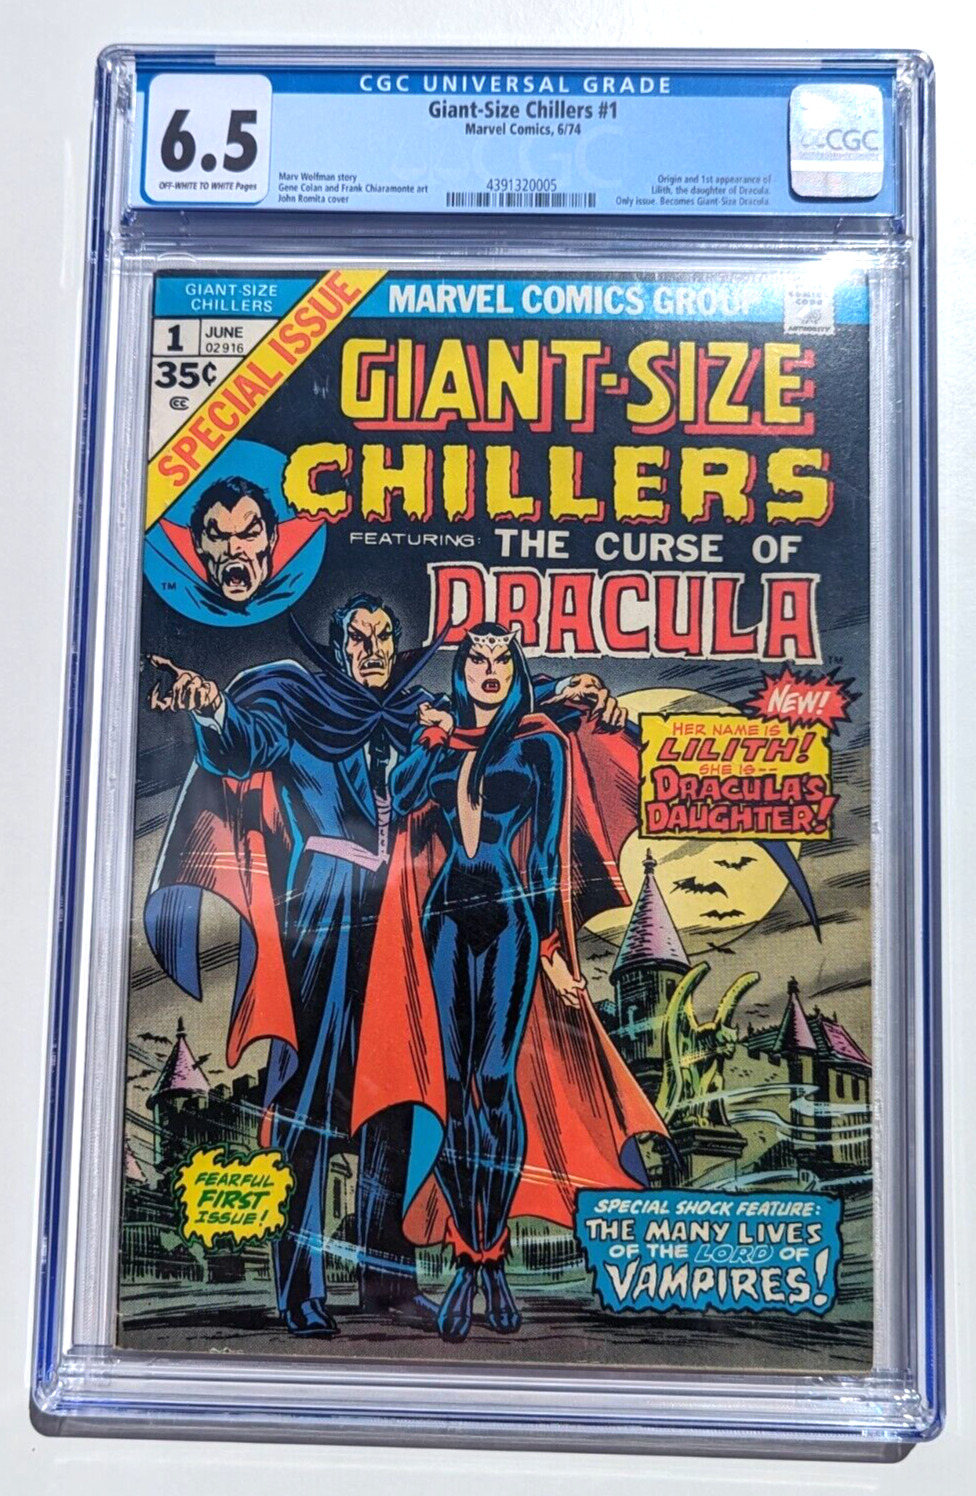 Giant Size Chillers 1 CGC 6.5 1974 1st App of Lilith Dracula's Daughter